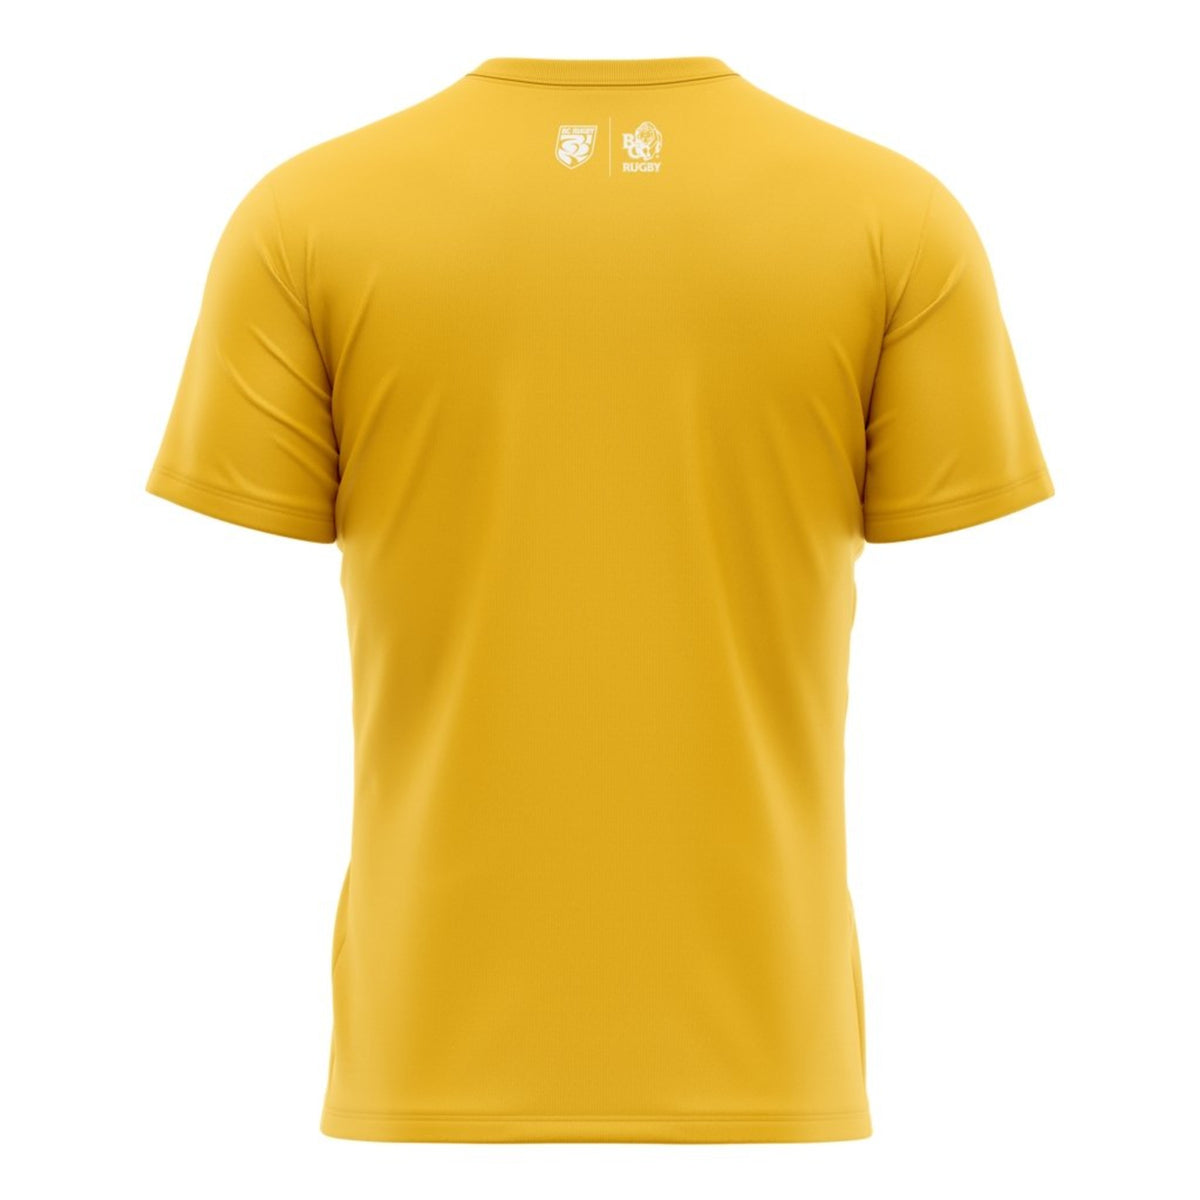 BC Rugby 2021 &quot;Bears&quot; Tee - Men&#39;s White/Gold - www.therugbyshop.com www.therugbyshop.com XIX Brands TEES BC Rugby 2021 &quot;Bears&quot; Tee - Men&#39;s White/Gold